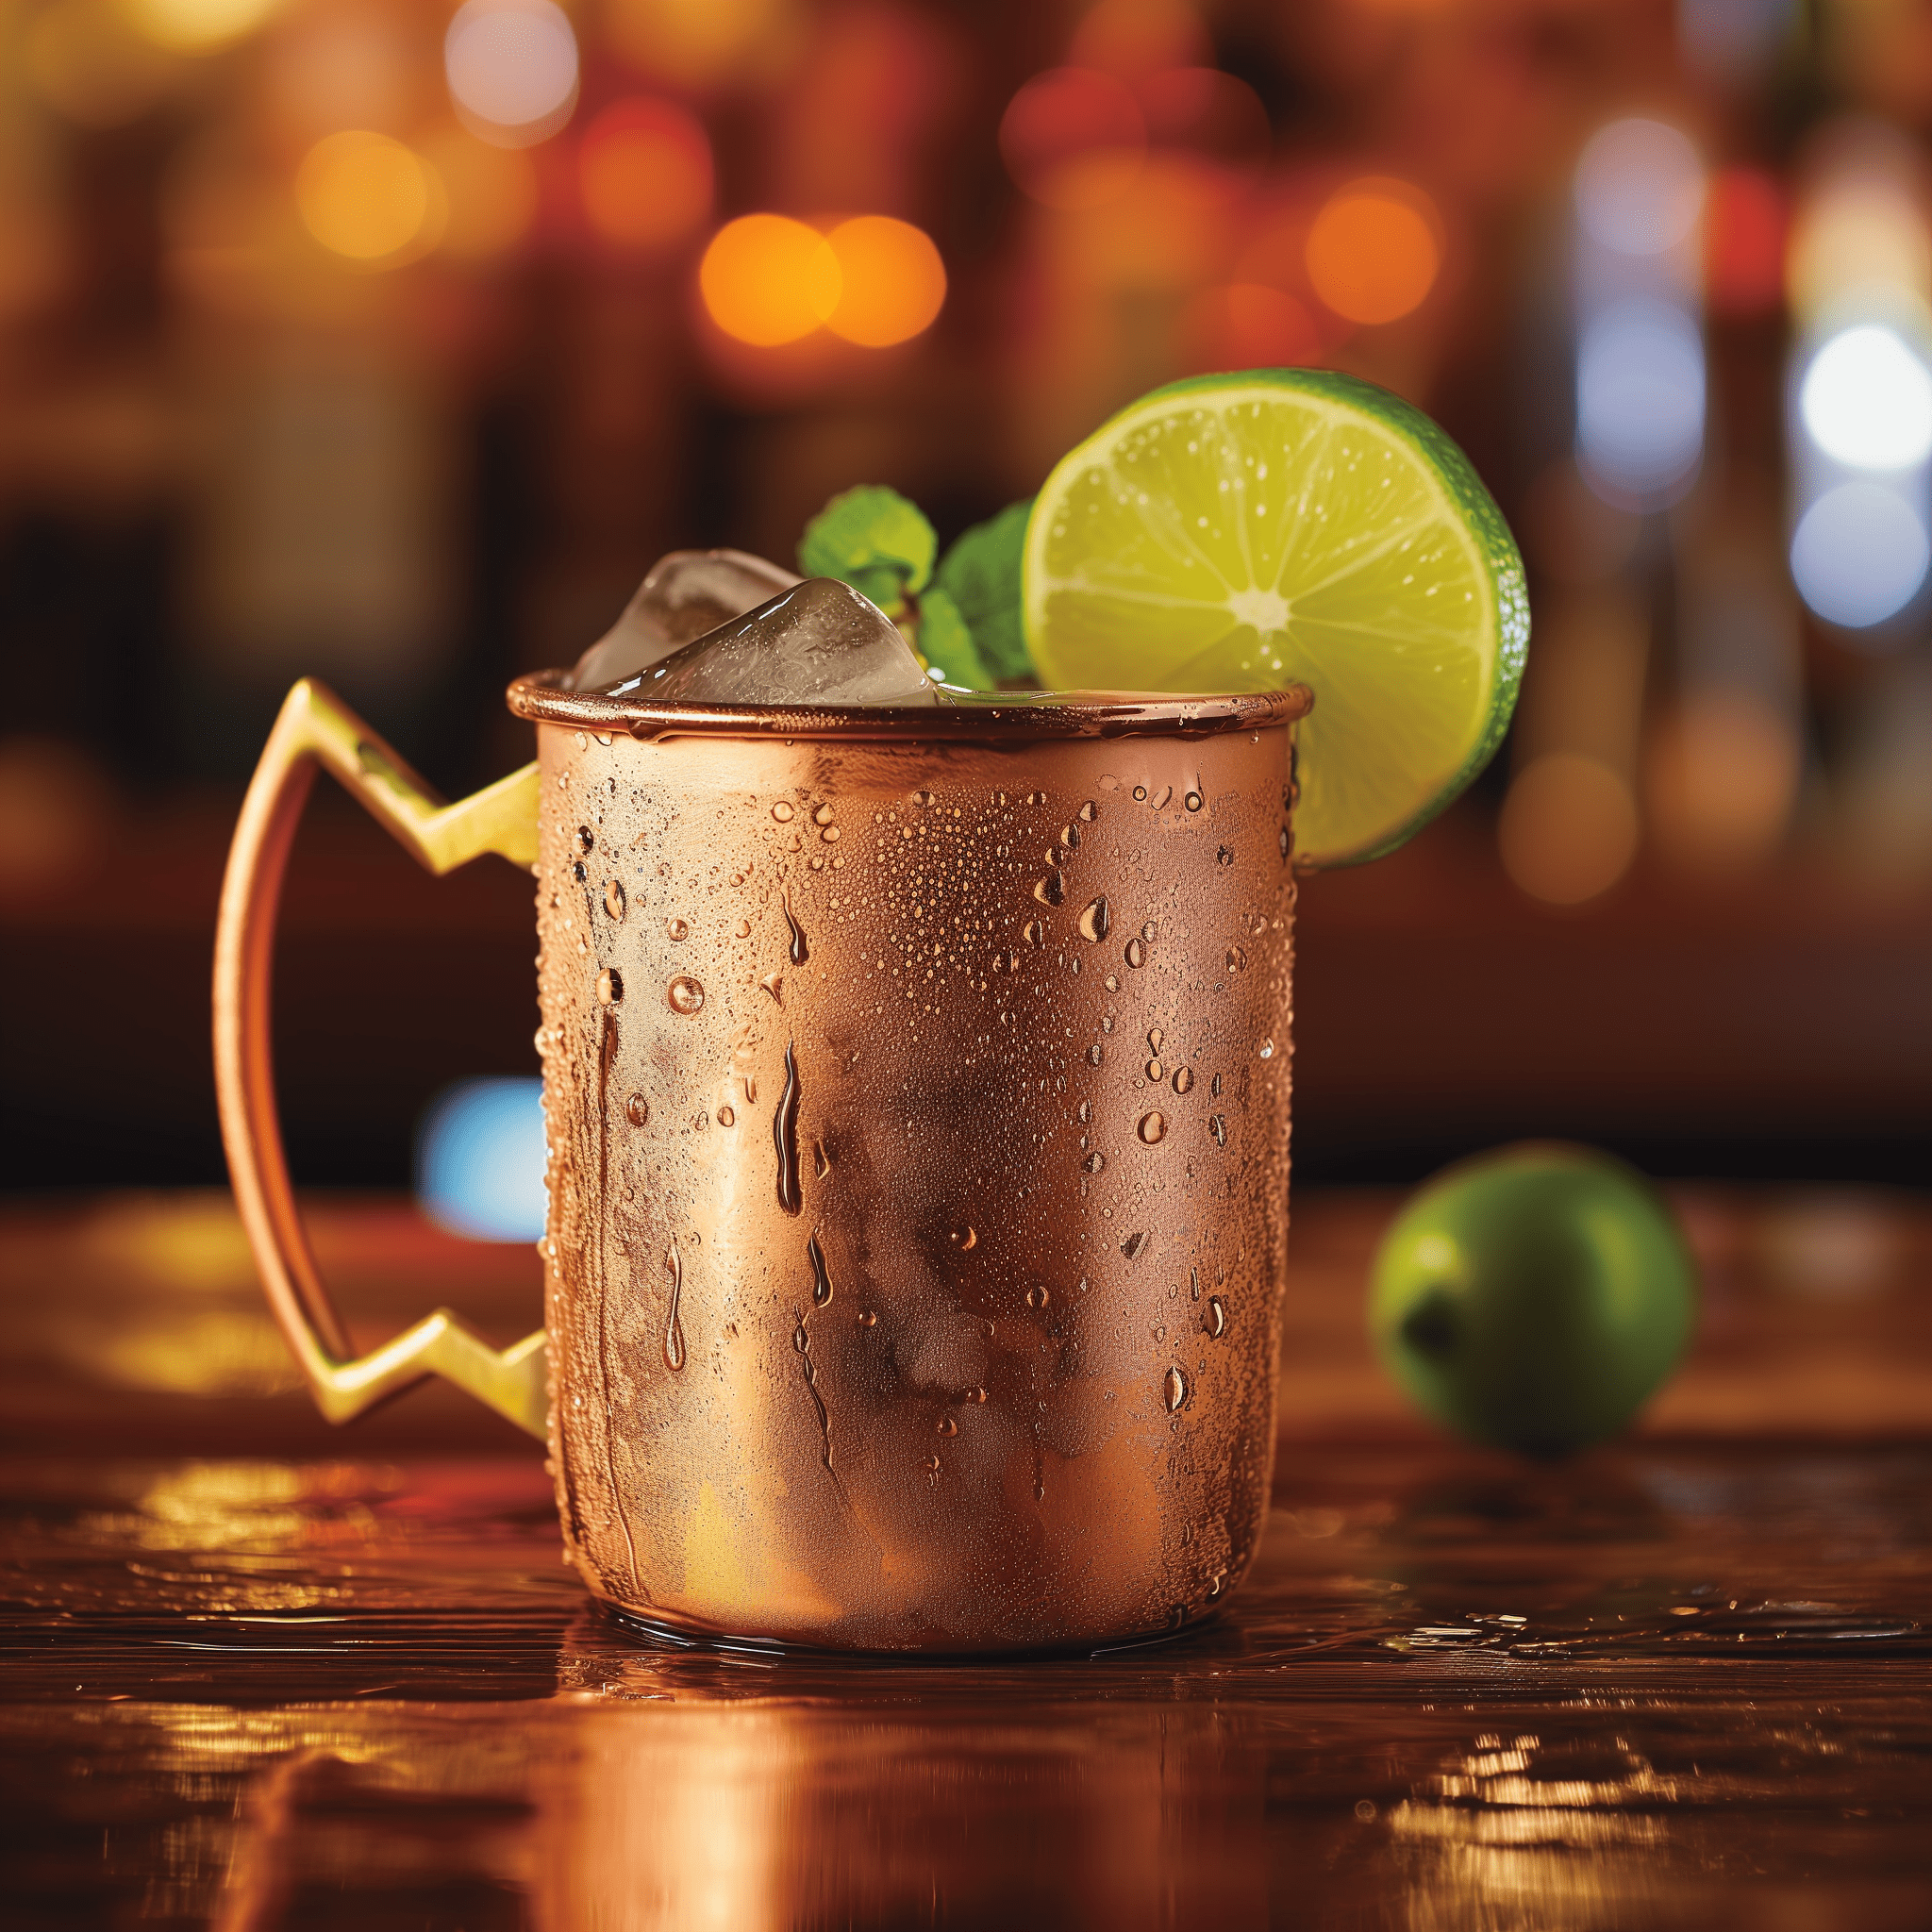 Montenegro Mule Cocktail Recipe - The Montenegro Mule offers a harmonious blend of spicy and sweet with a pronounced citrus tang. The ginger beer provides a peppery fizz, while the Amaro Montenegro delivers a complex bittersweet symphony, complemented by the freshness of the lime juice.